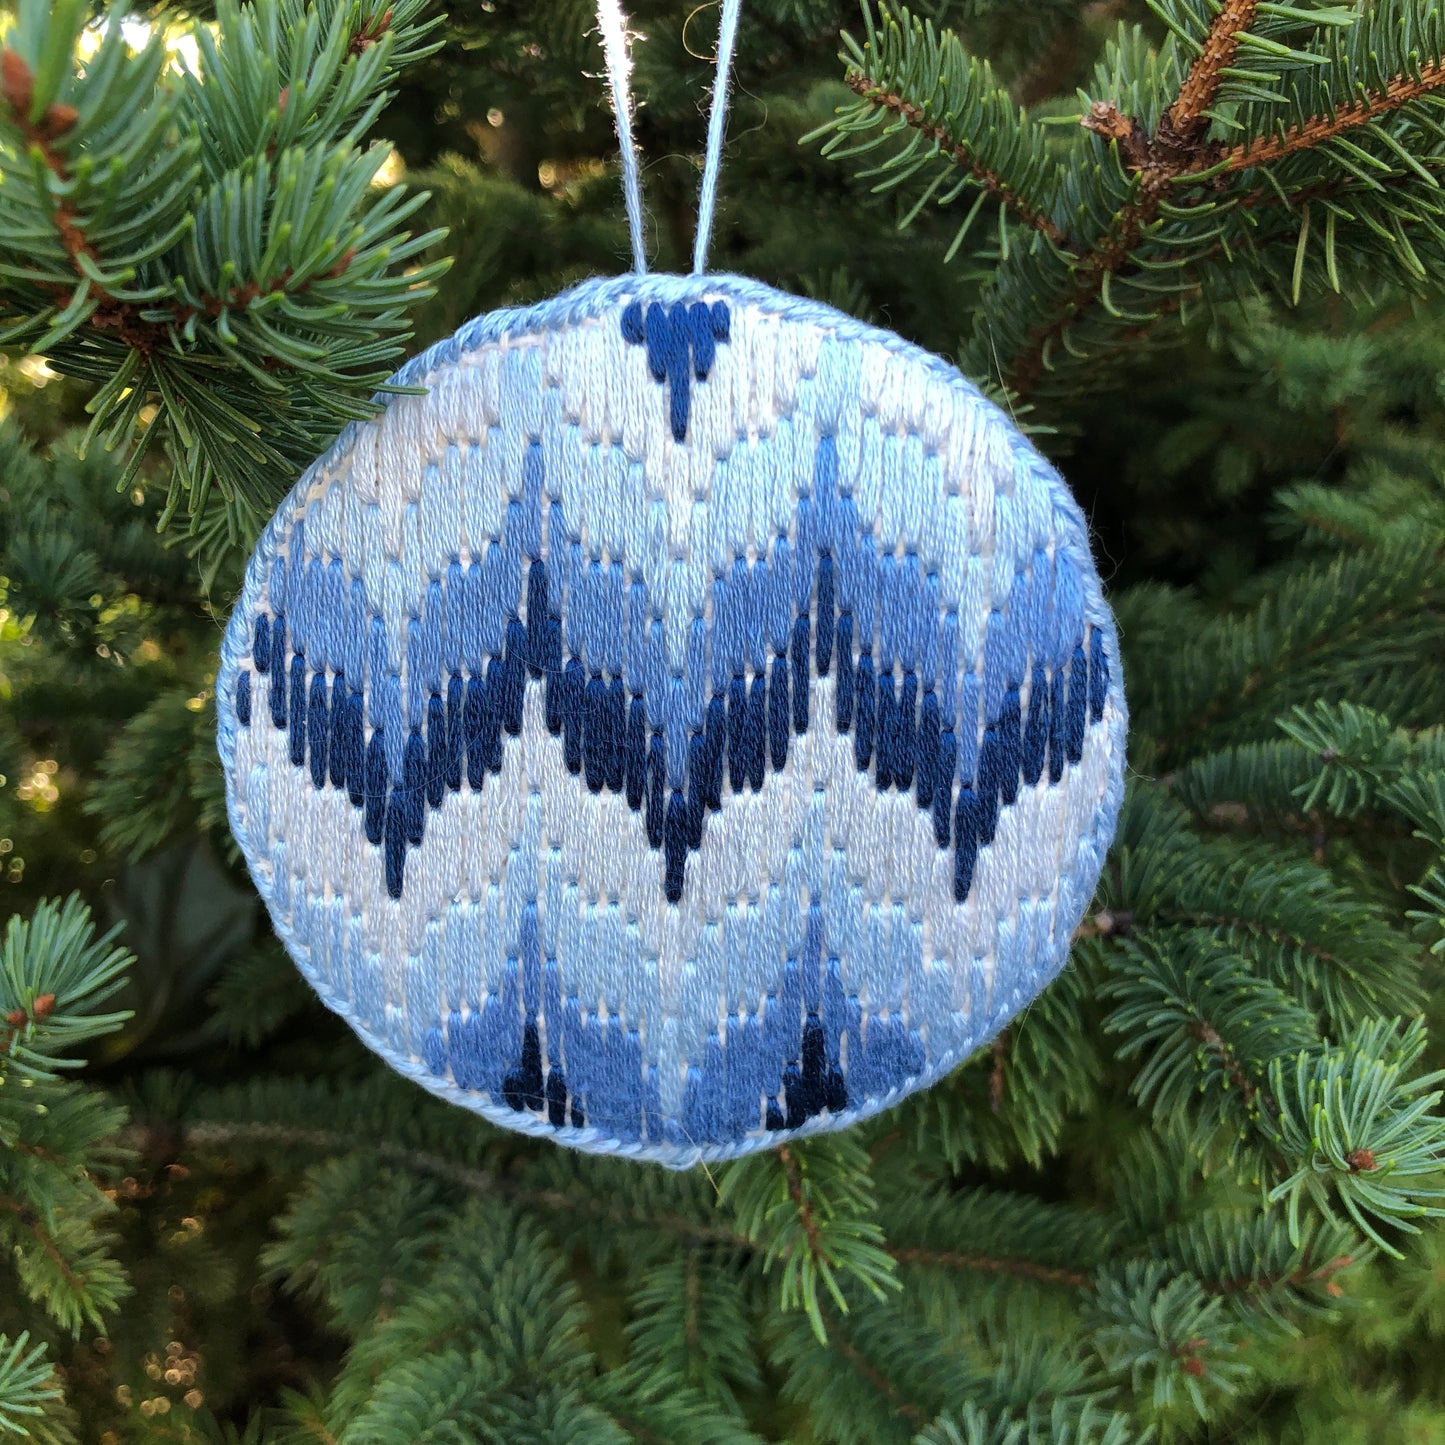 Christmas ornament with bargello stitching.